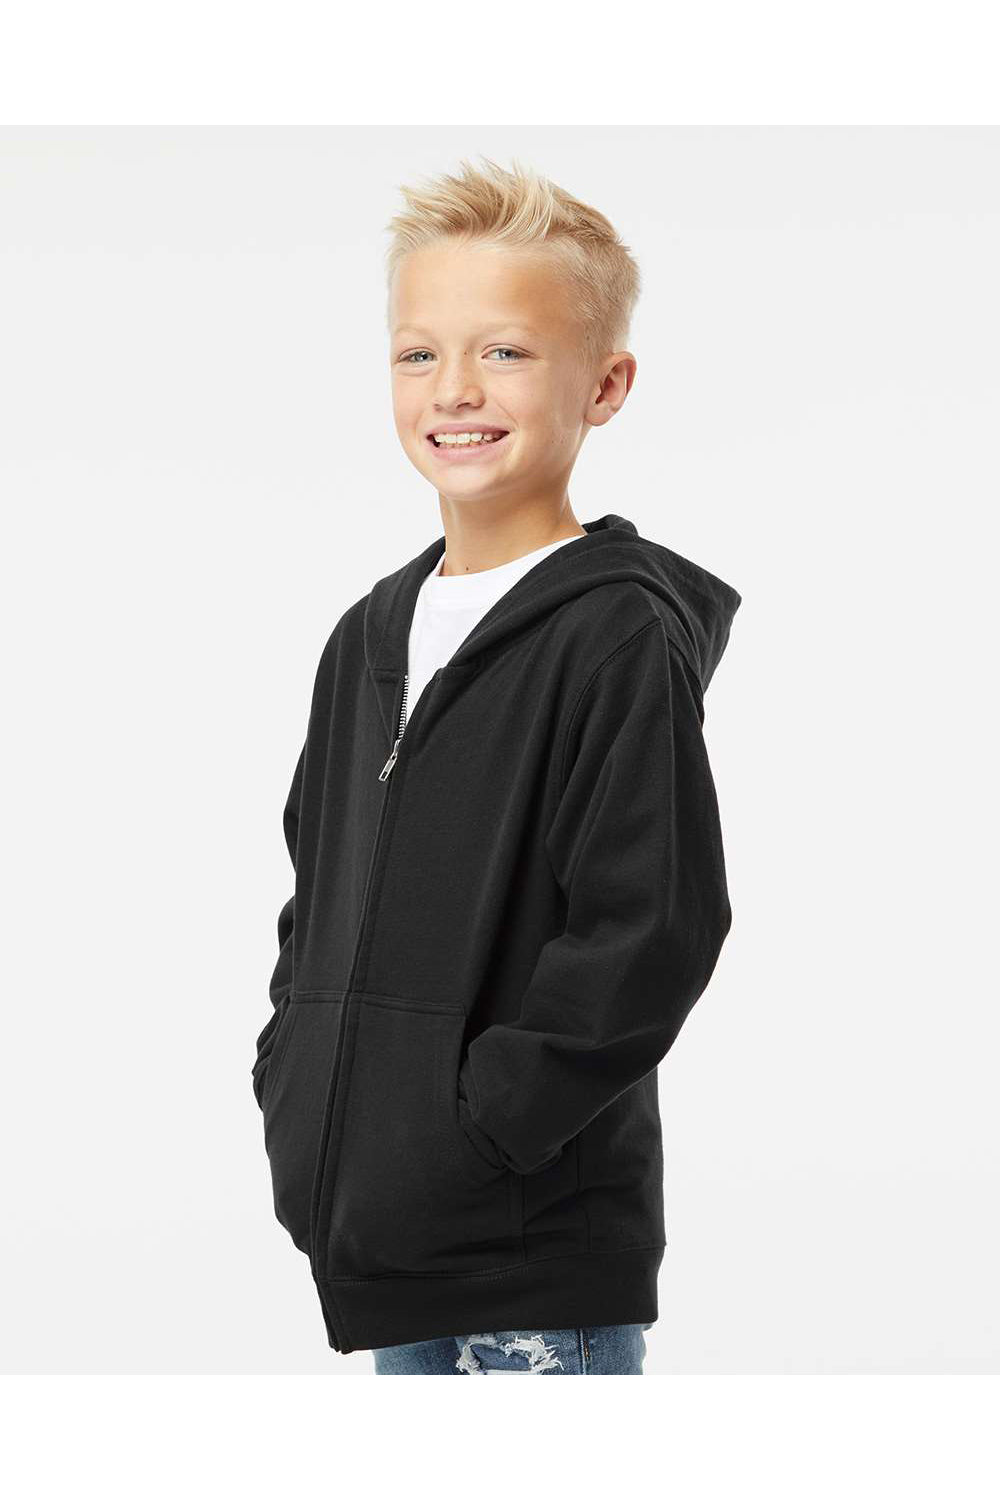 Independent Trading Co. SS4001YZ Youth Full Zip Hooded Sweatshirt Hoodie Black Model Side